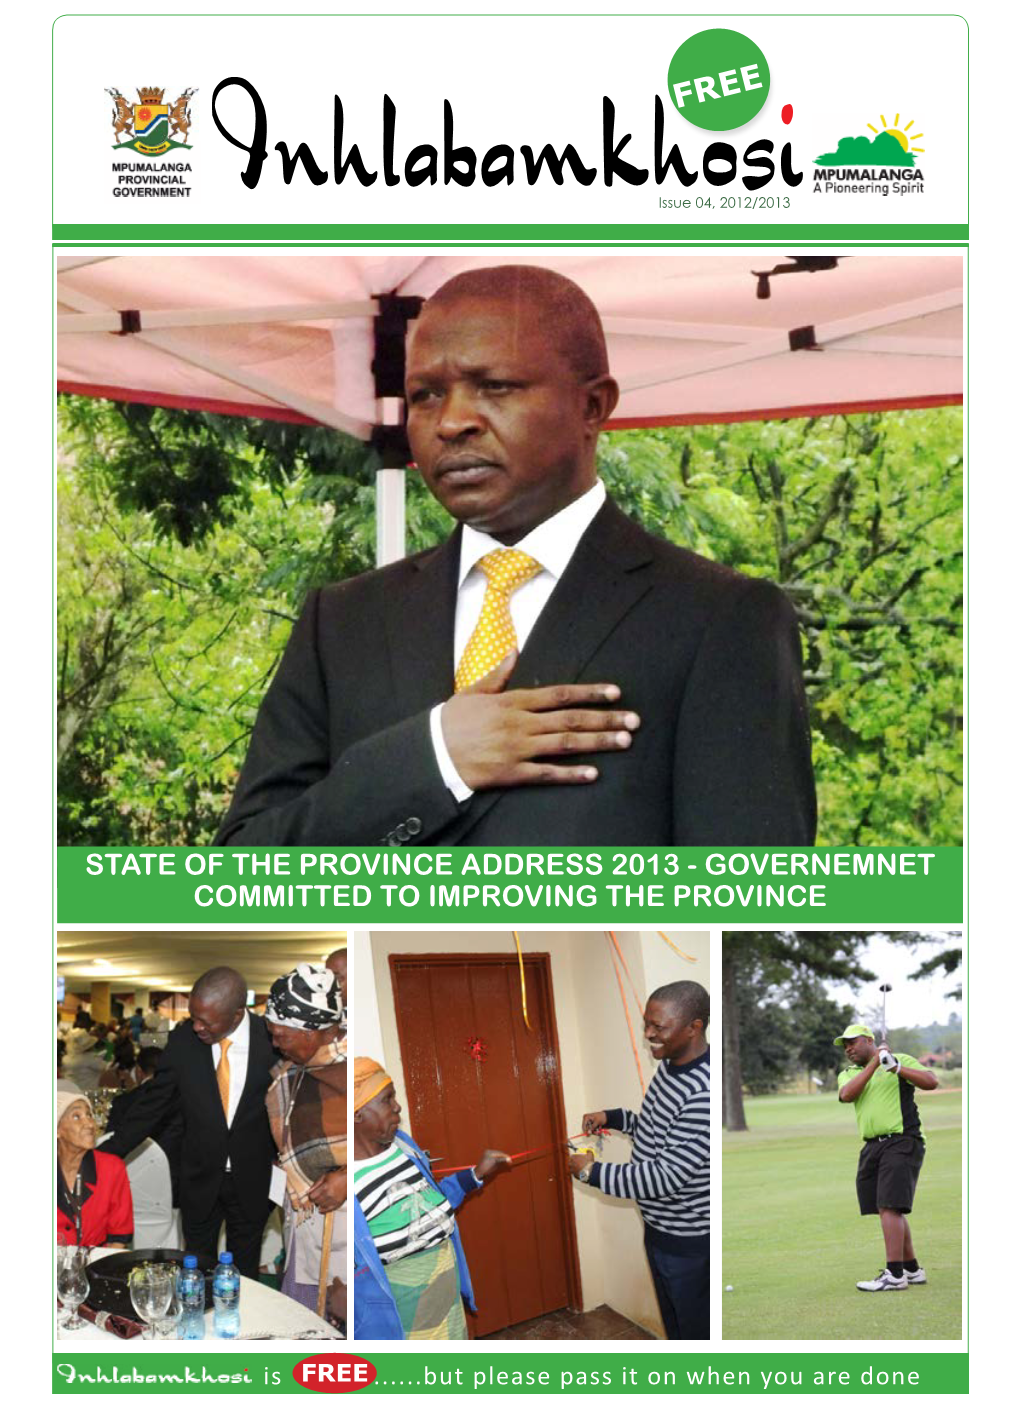 State of the Province Address 2013 - Governemnet Committed to Improving the Province